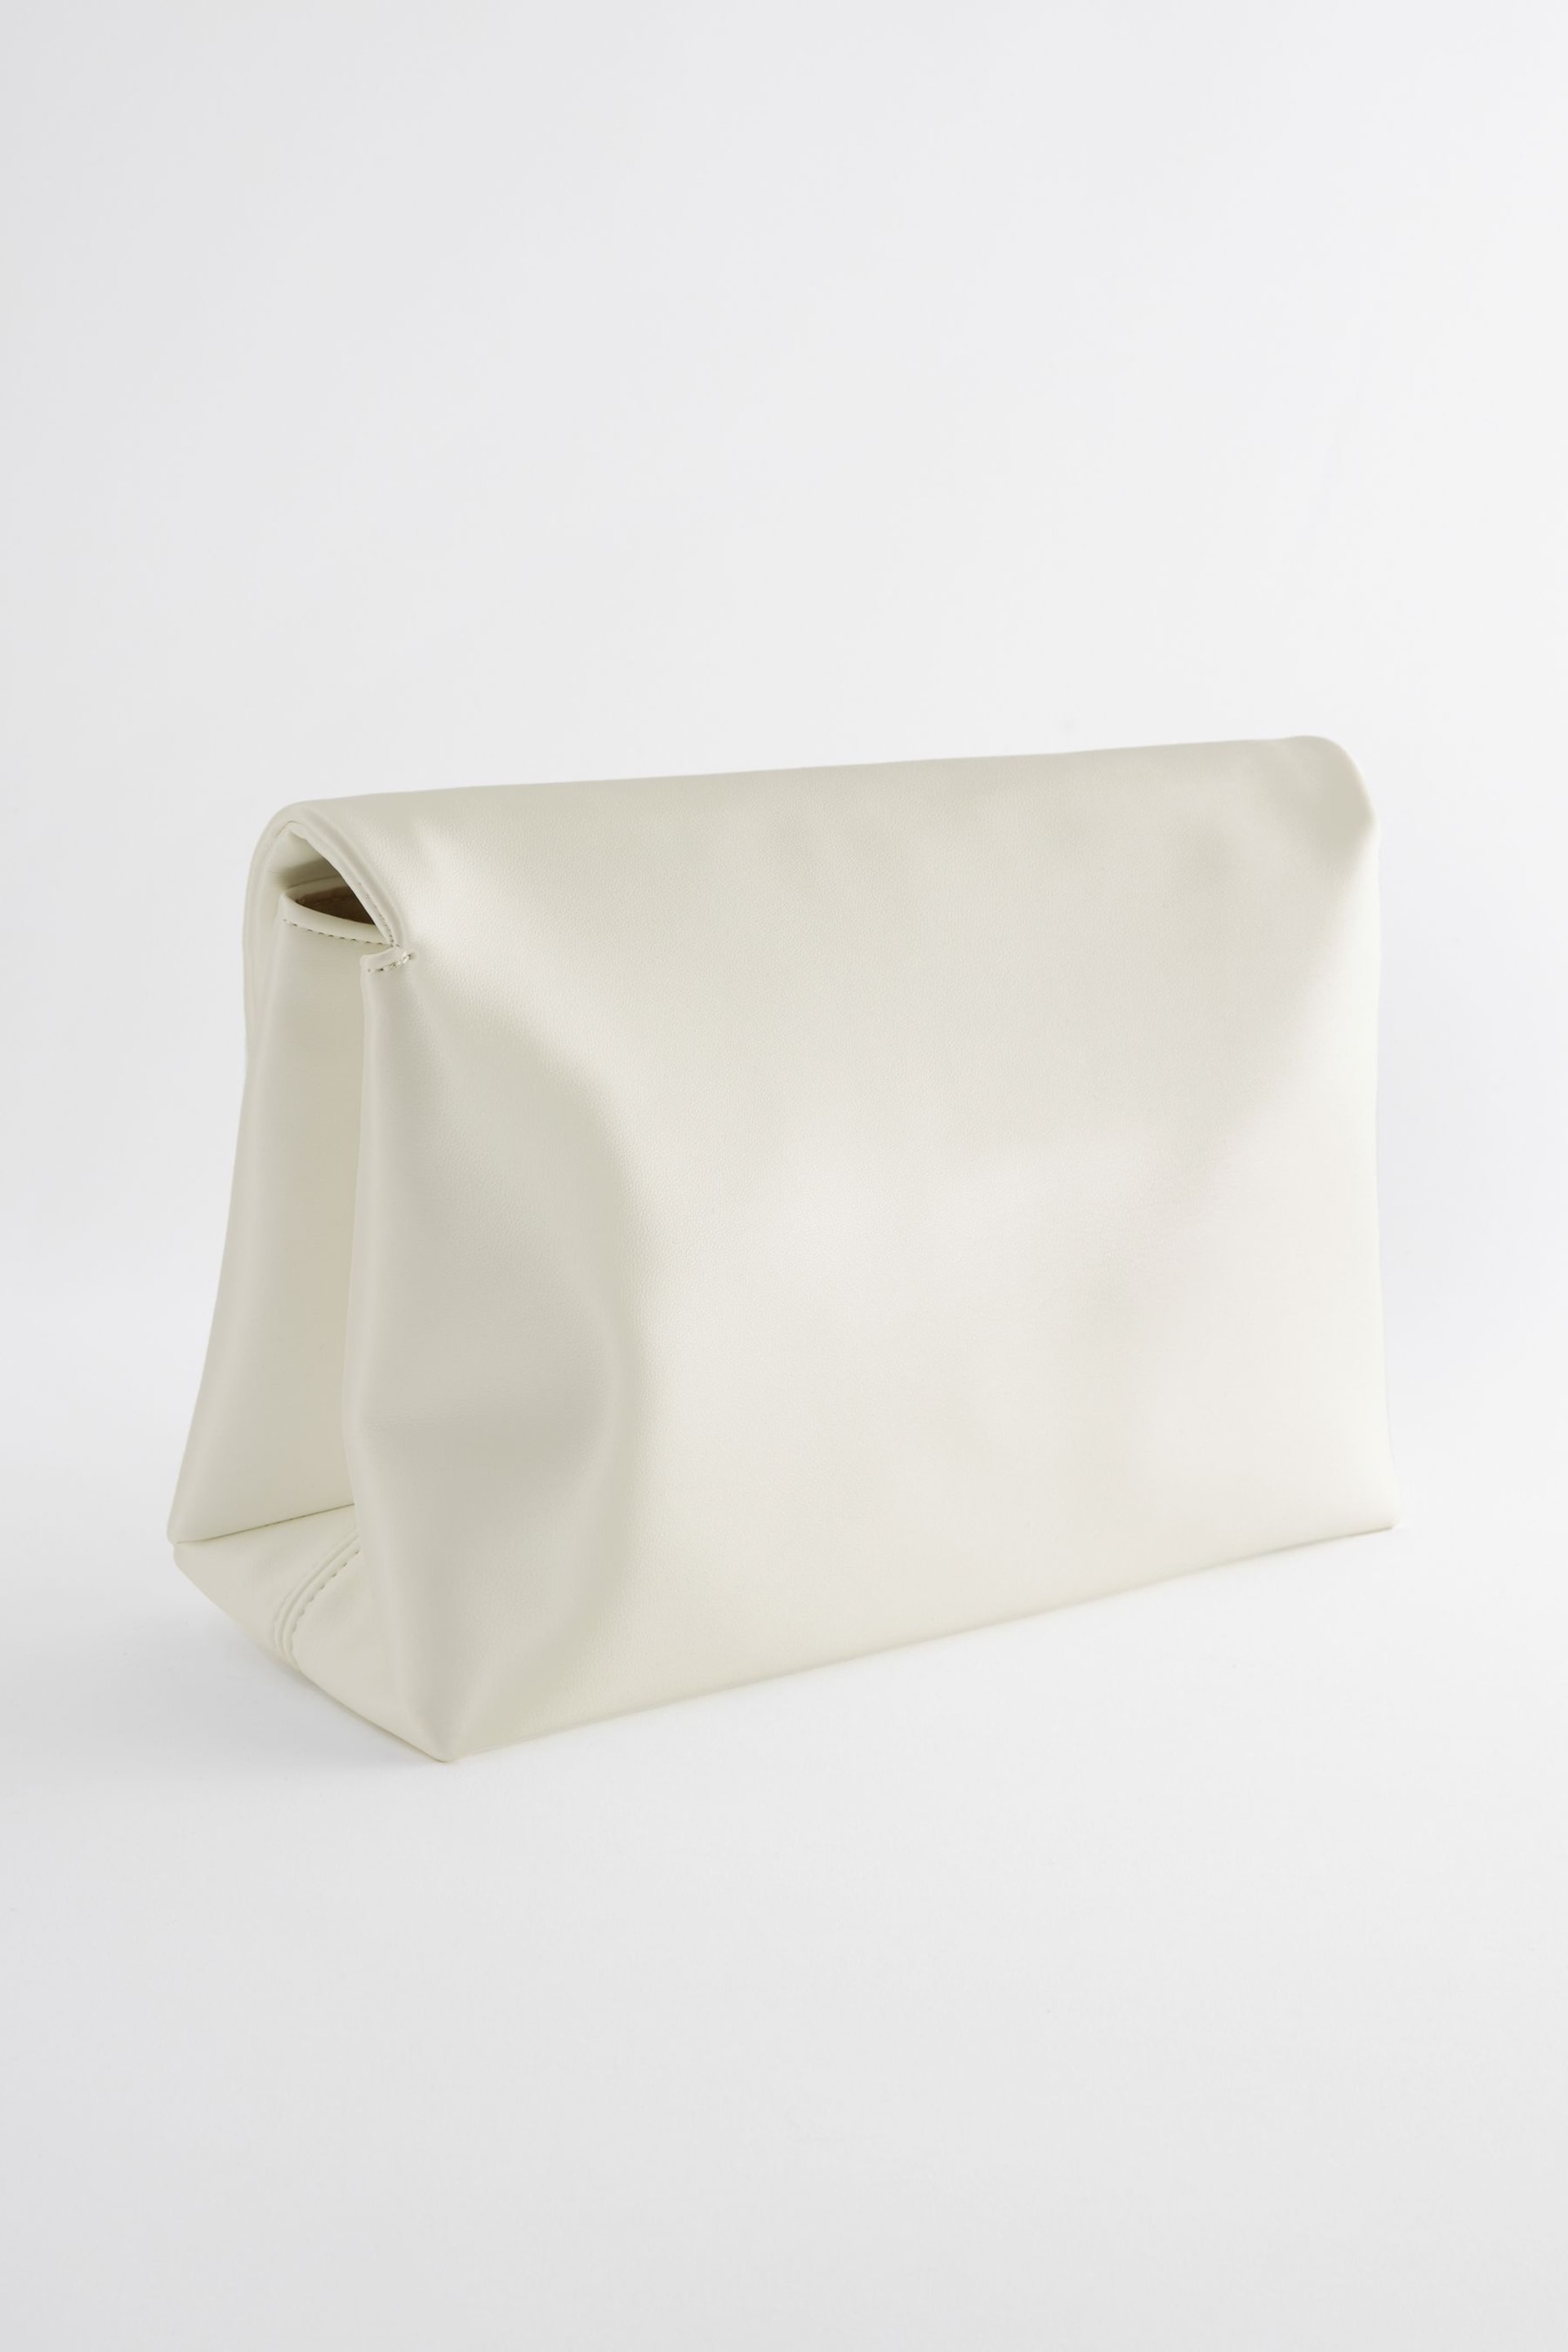 White Oversized White Clutch Bag - Image 5 of 7